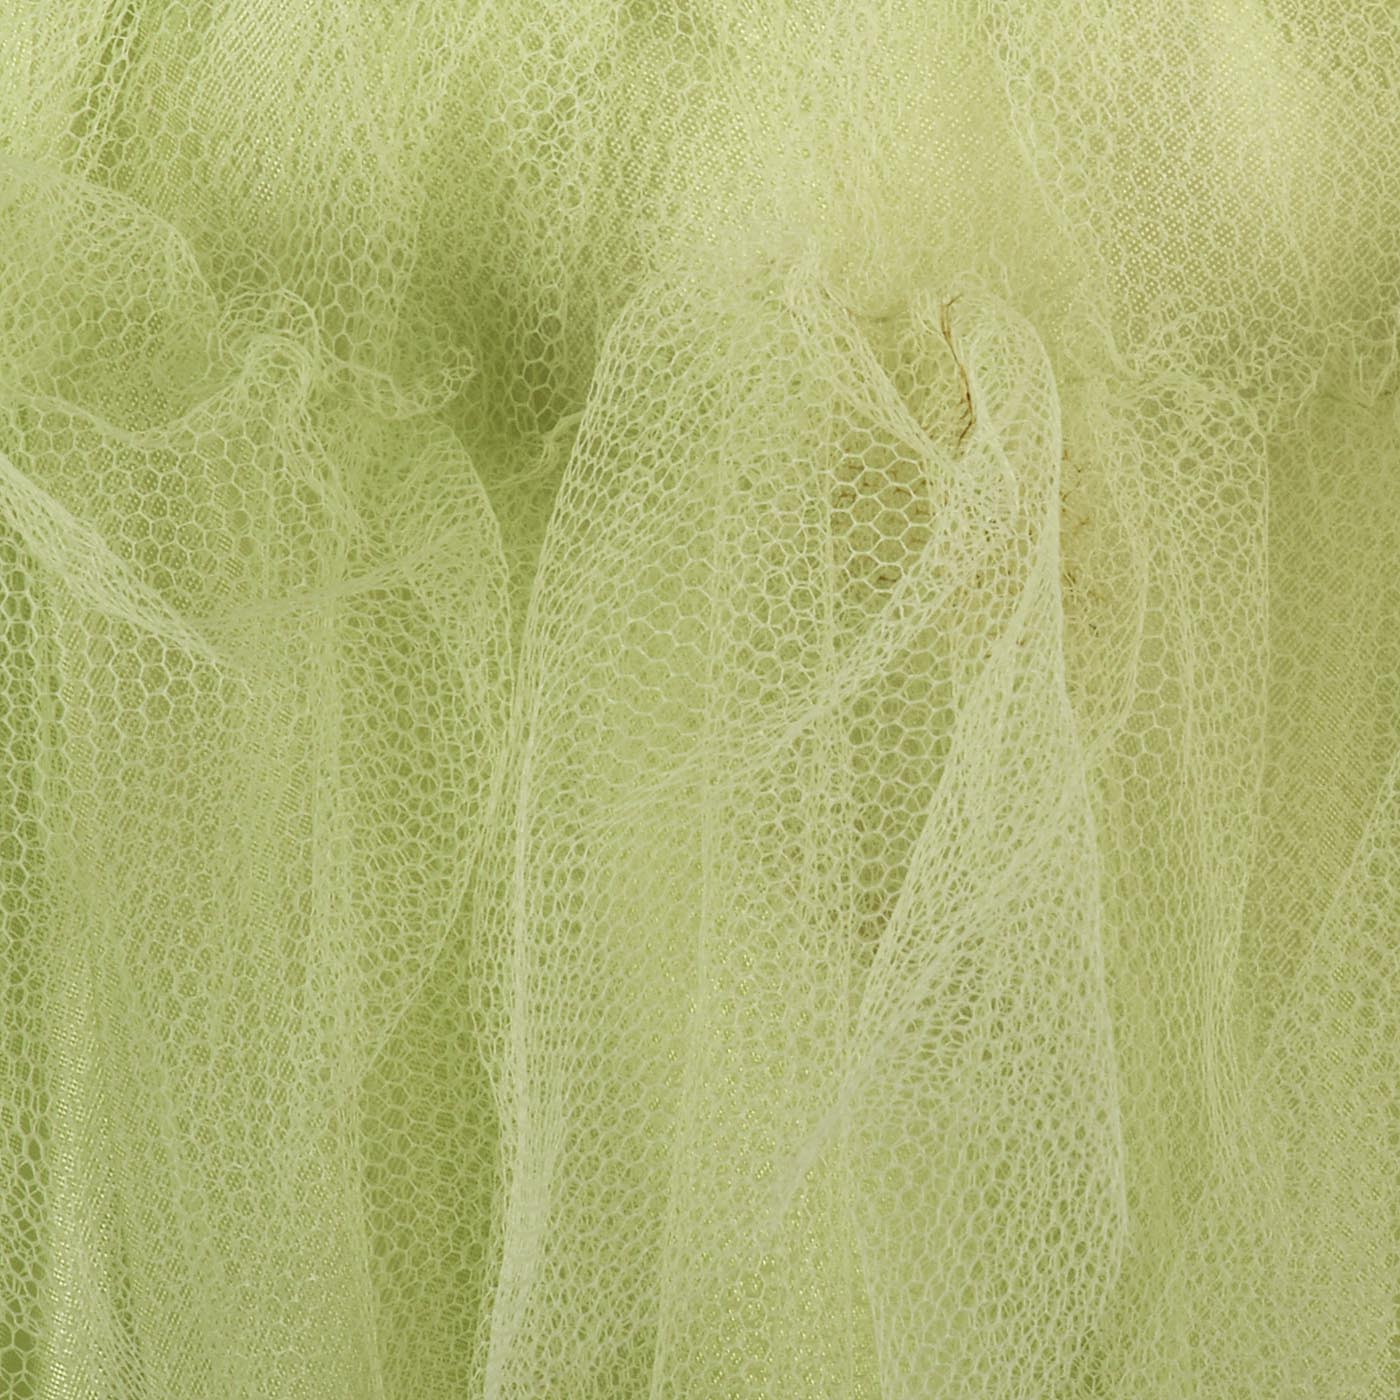 1950s Pale Green Party Dress with Tulle Layers